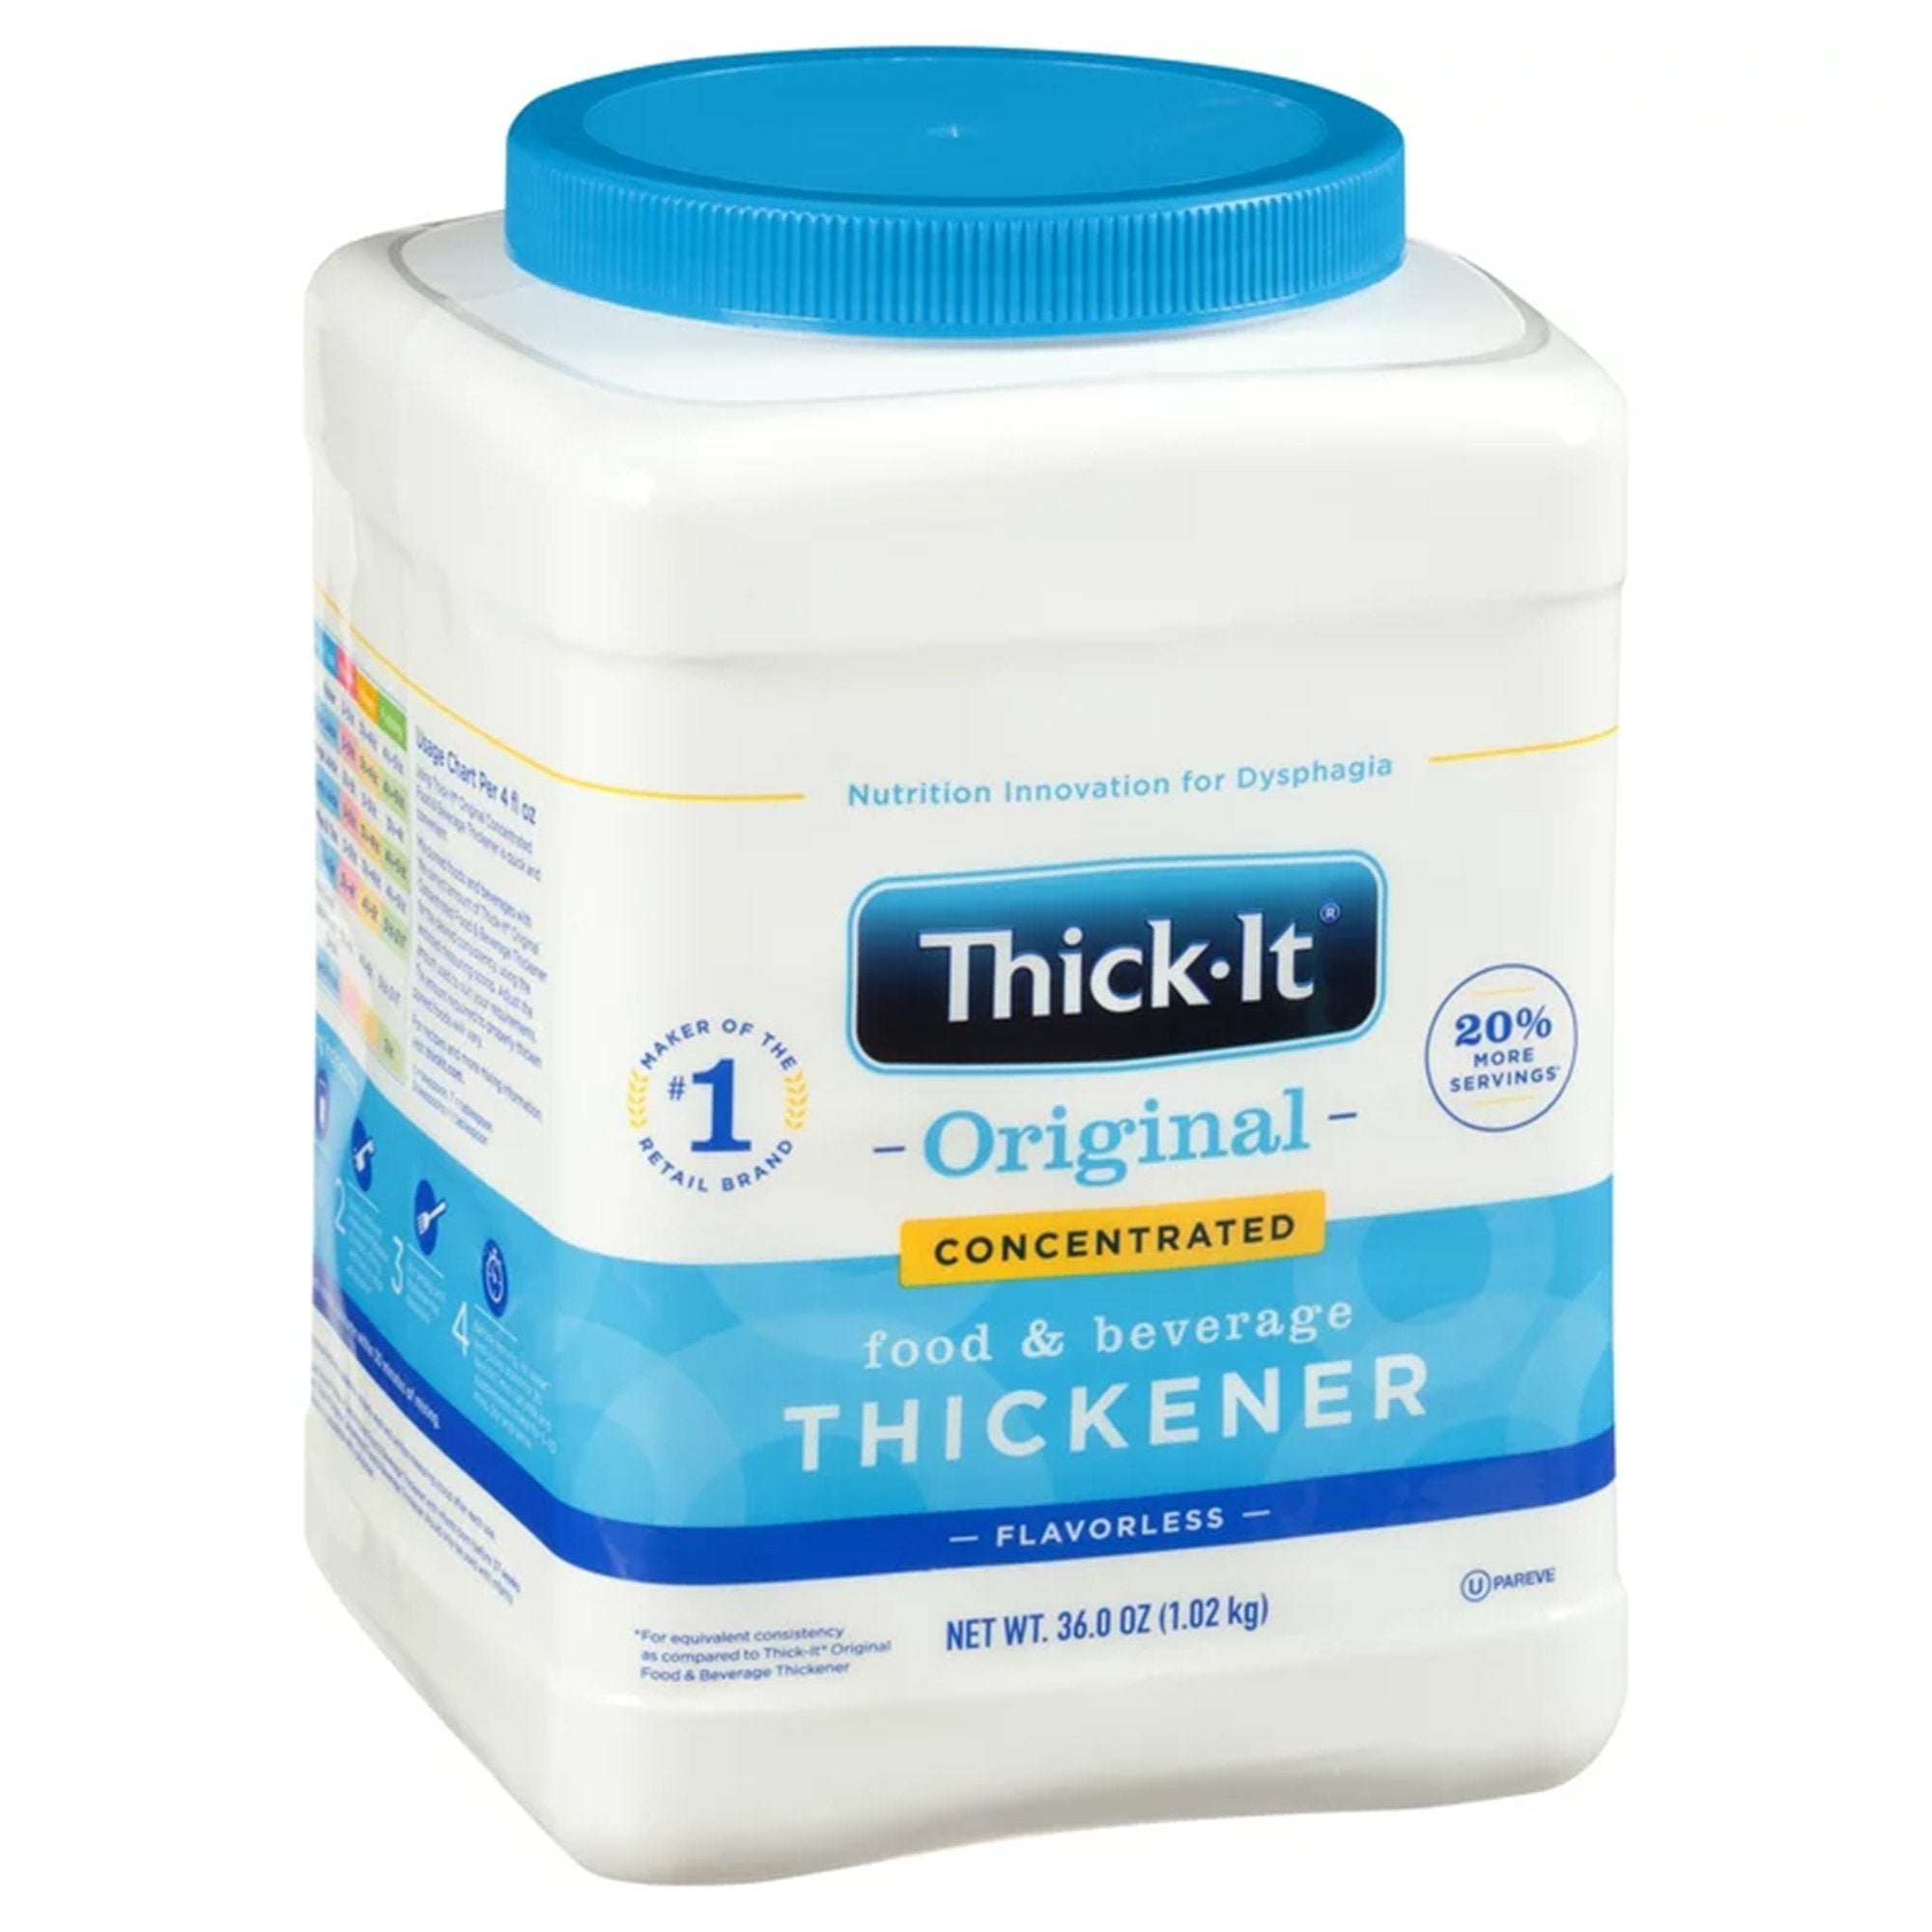 Food and Beverage Thickener Thick-It Original Concentrated 10 oz. Canister Unflavored Powder IDDSI Level 0 Thin